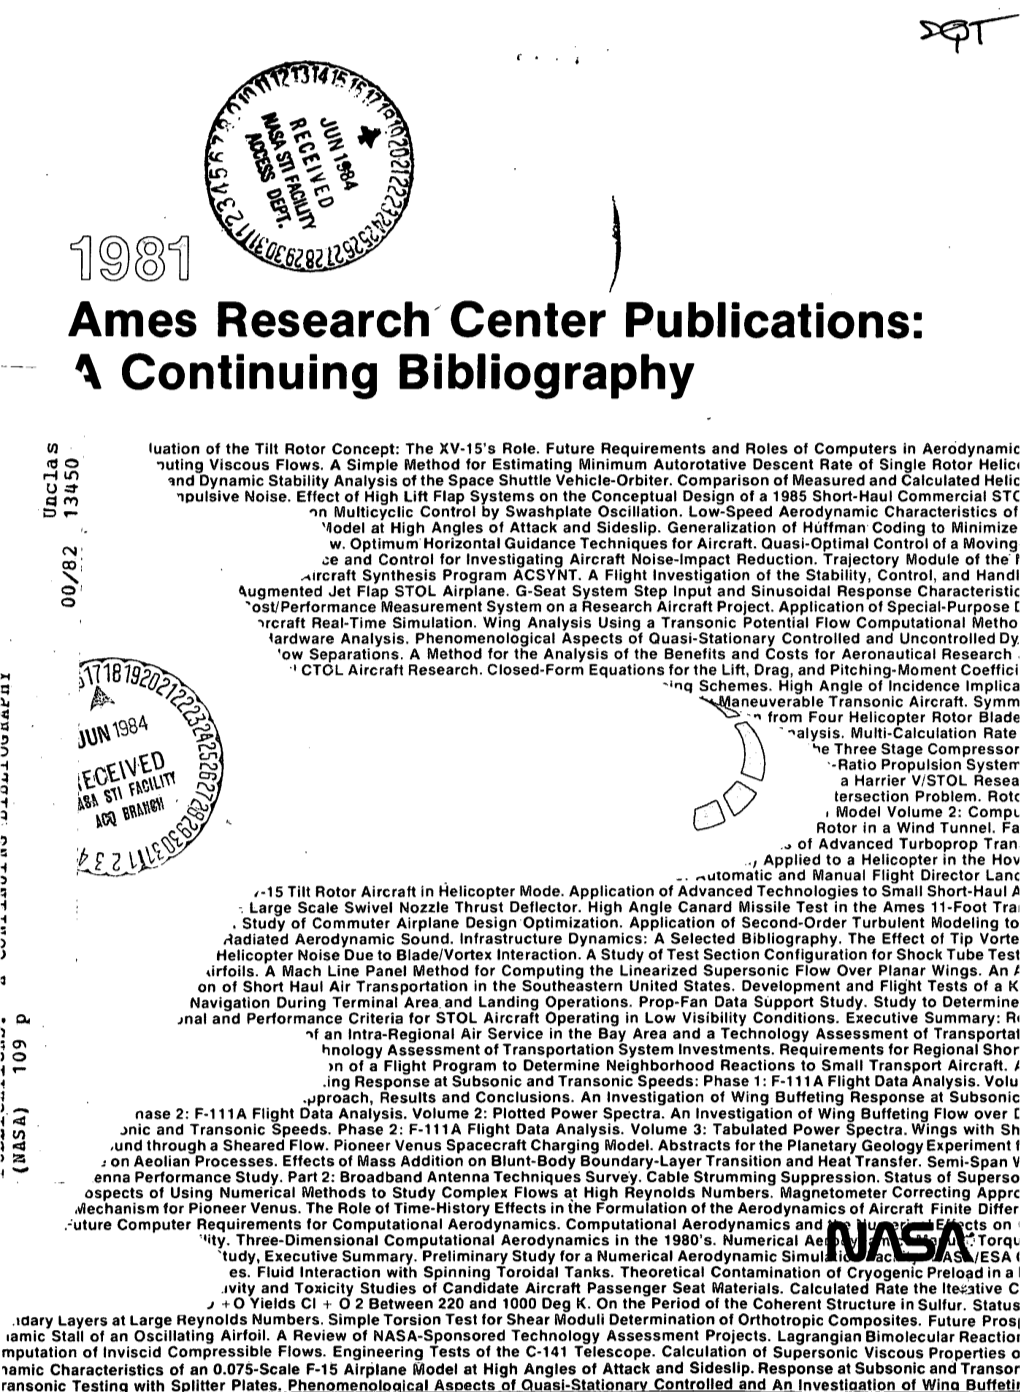 Ames Research Center Publications: Continuing Bibliography